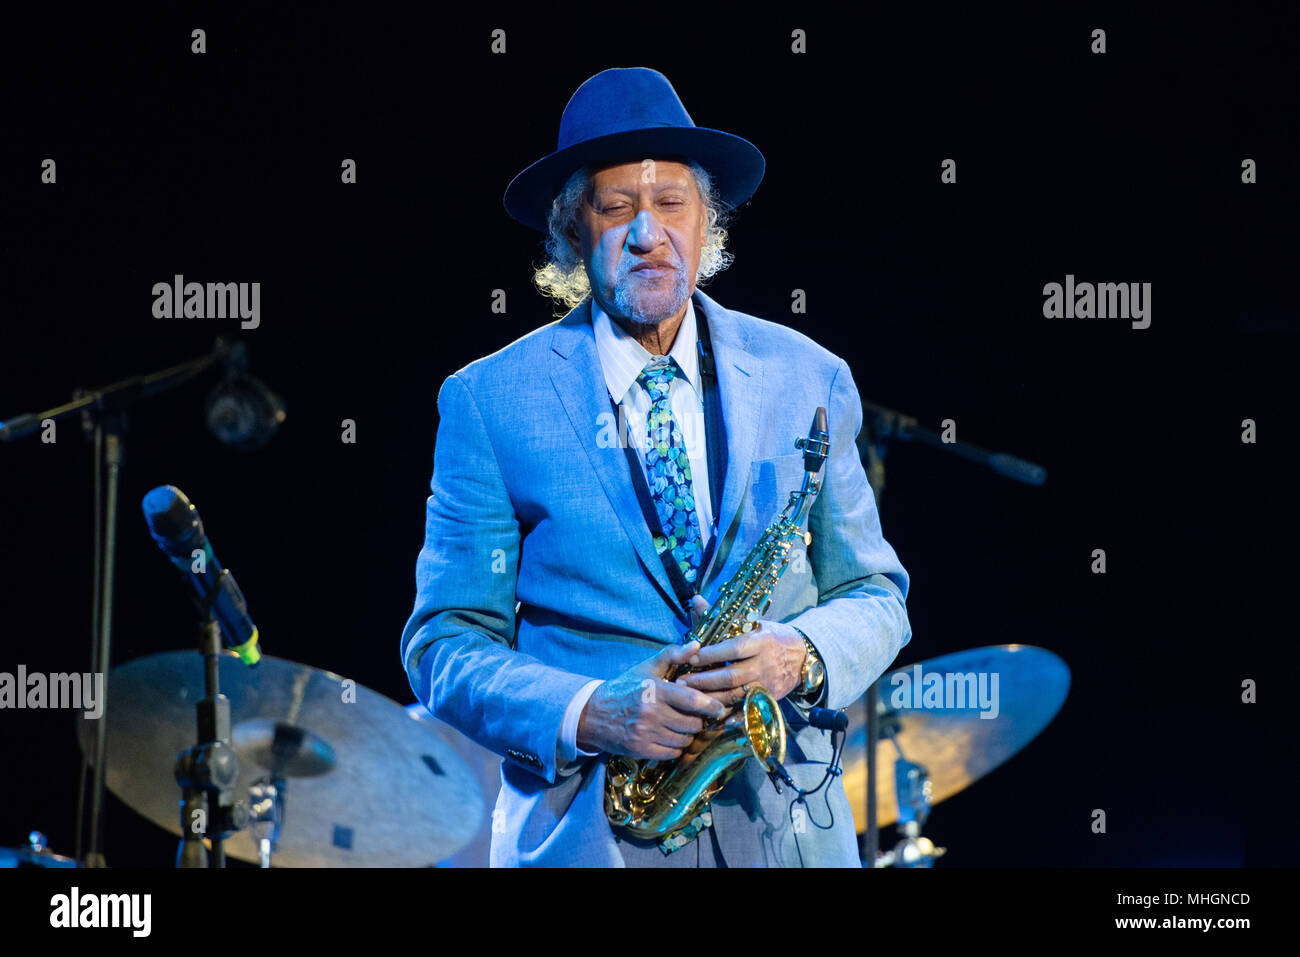 Italy, 2018 April 30th: The American jazz saxophonist and composer Gary Bartz performing live on stage at the Officine Grandi Riparazioni in Torino Photo: Alessandro Bosio/Alamy Live News Stock Photo